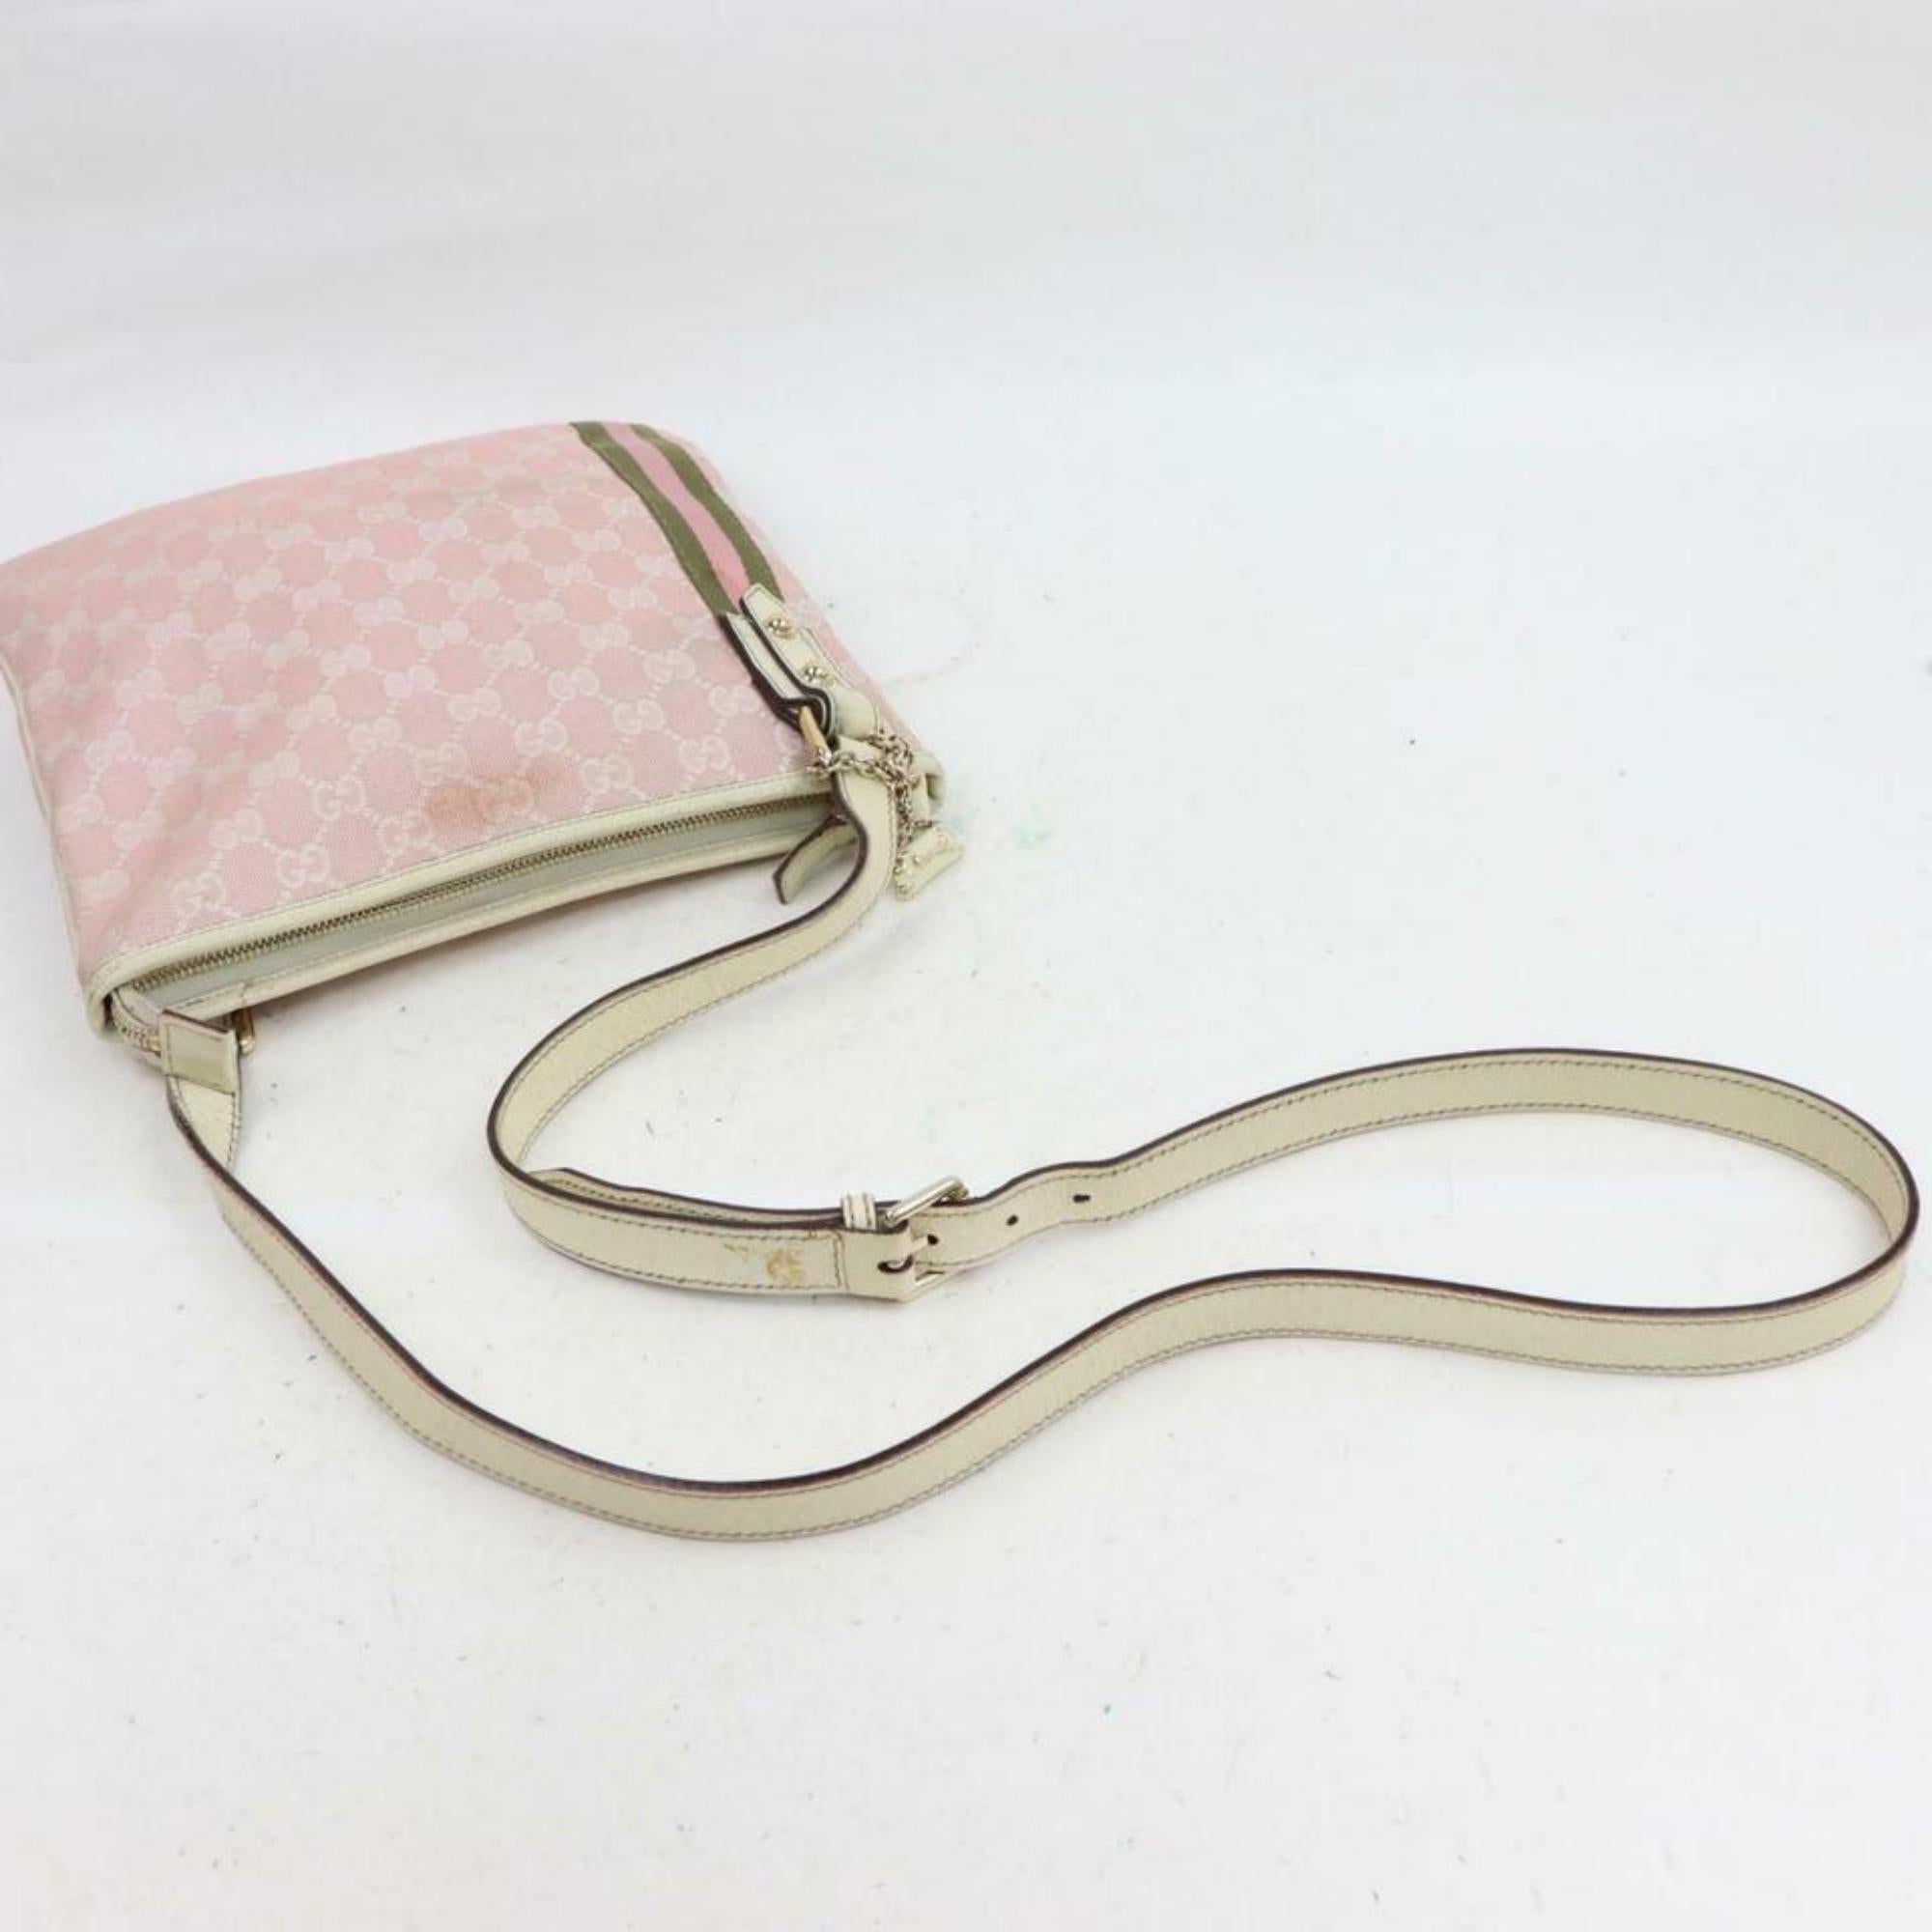 Gucci Monogram Gg Web Stripe Messenger 870337 Pink Canvas Cross Body Bag In Good Condition For Sale In Forest Hills, NY